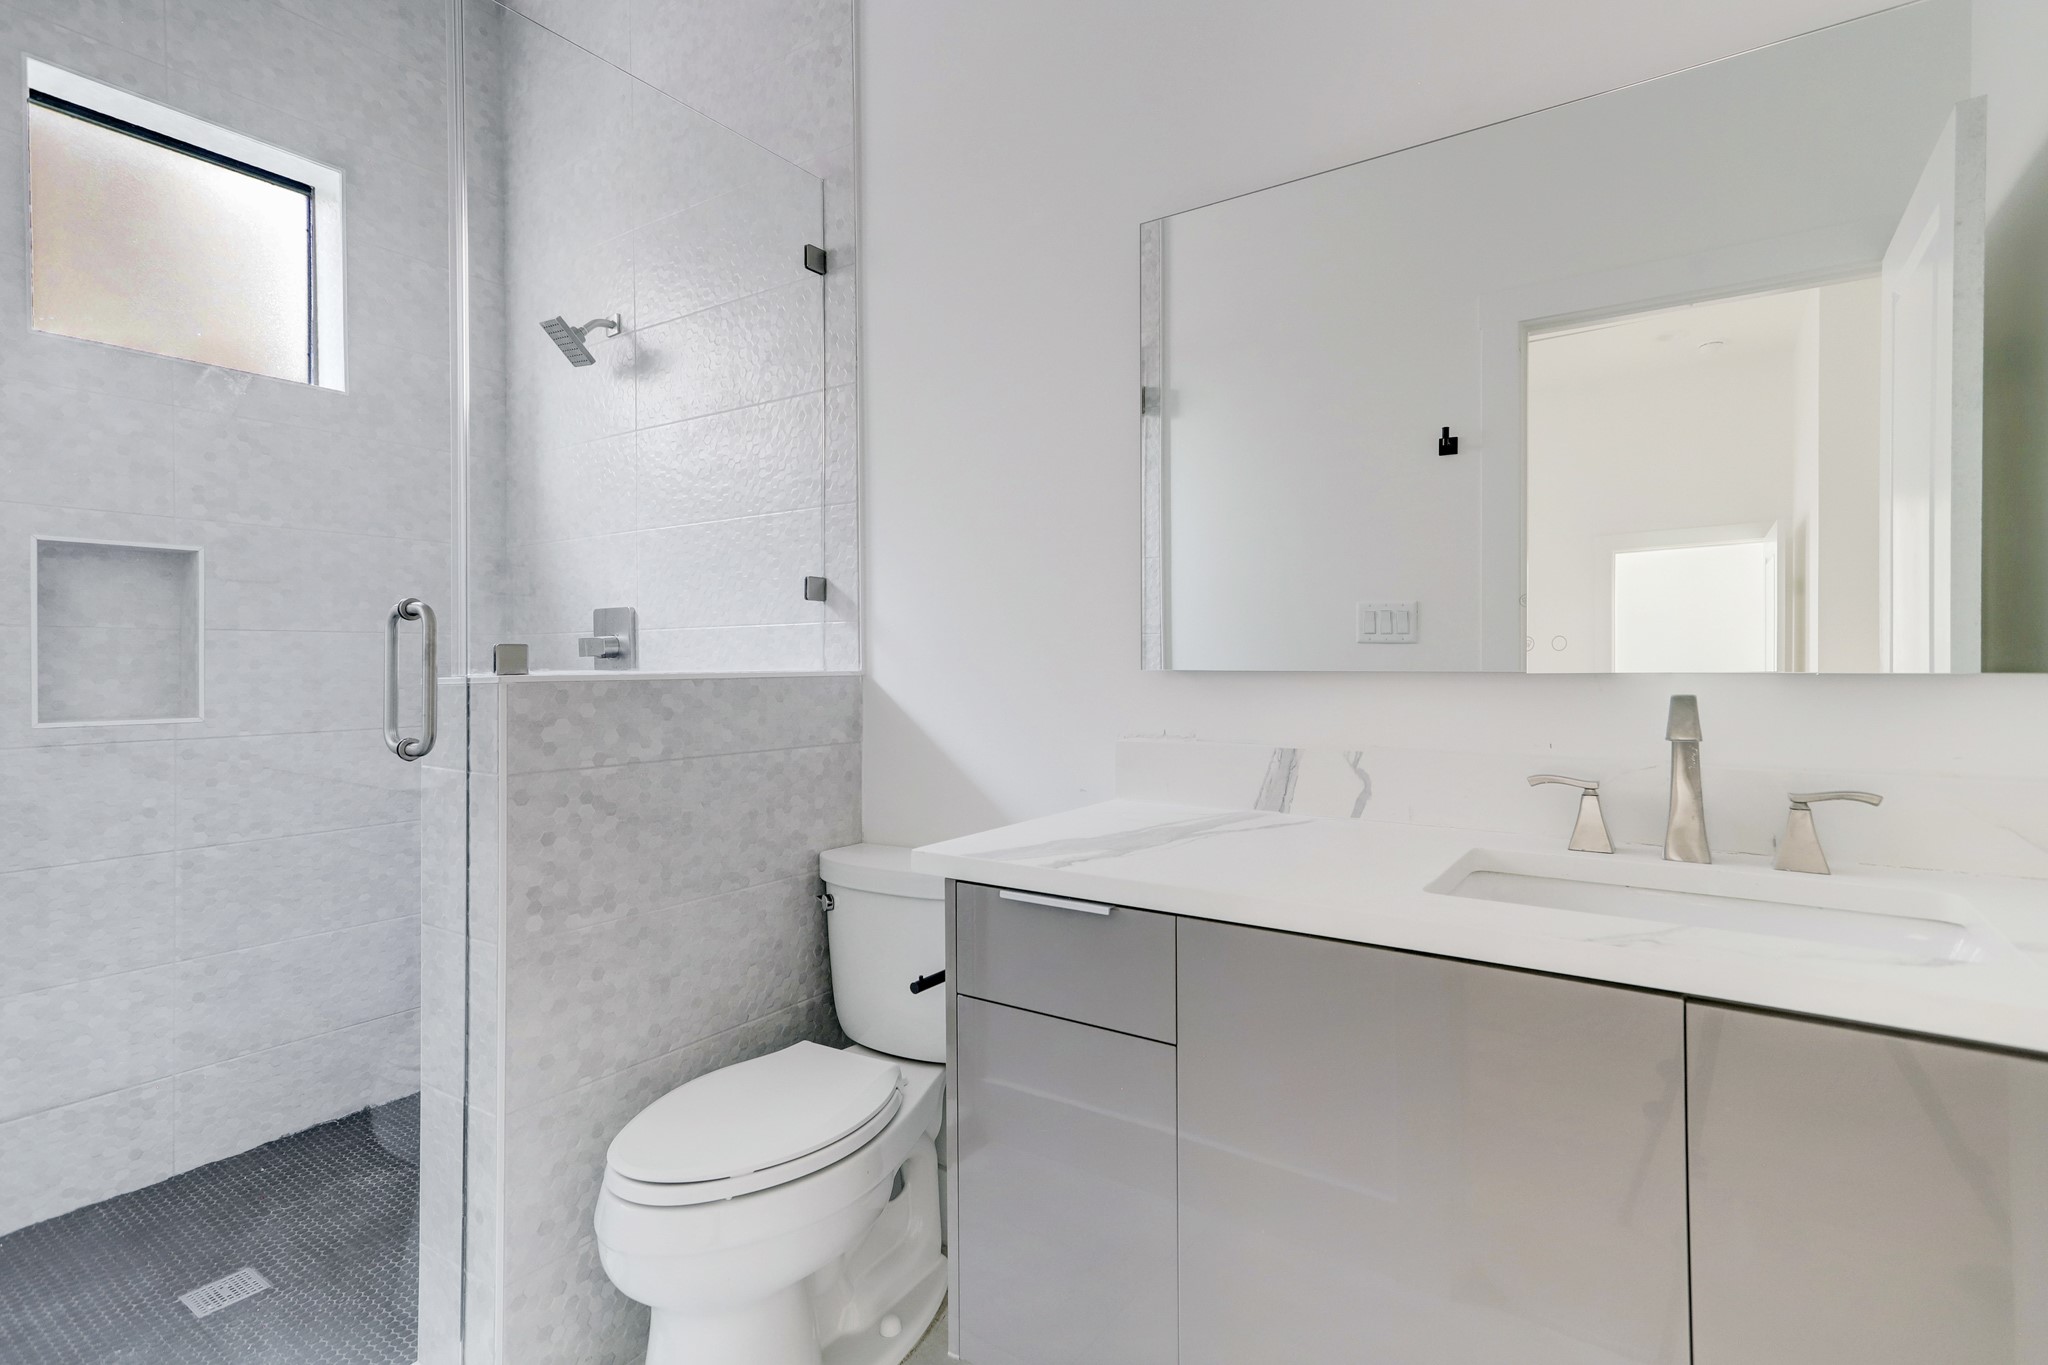 En suite bath with glass enclosed shower and contemporary design.